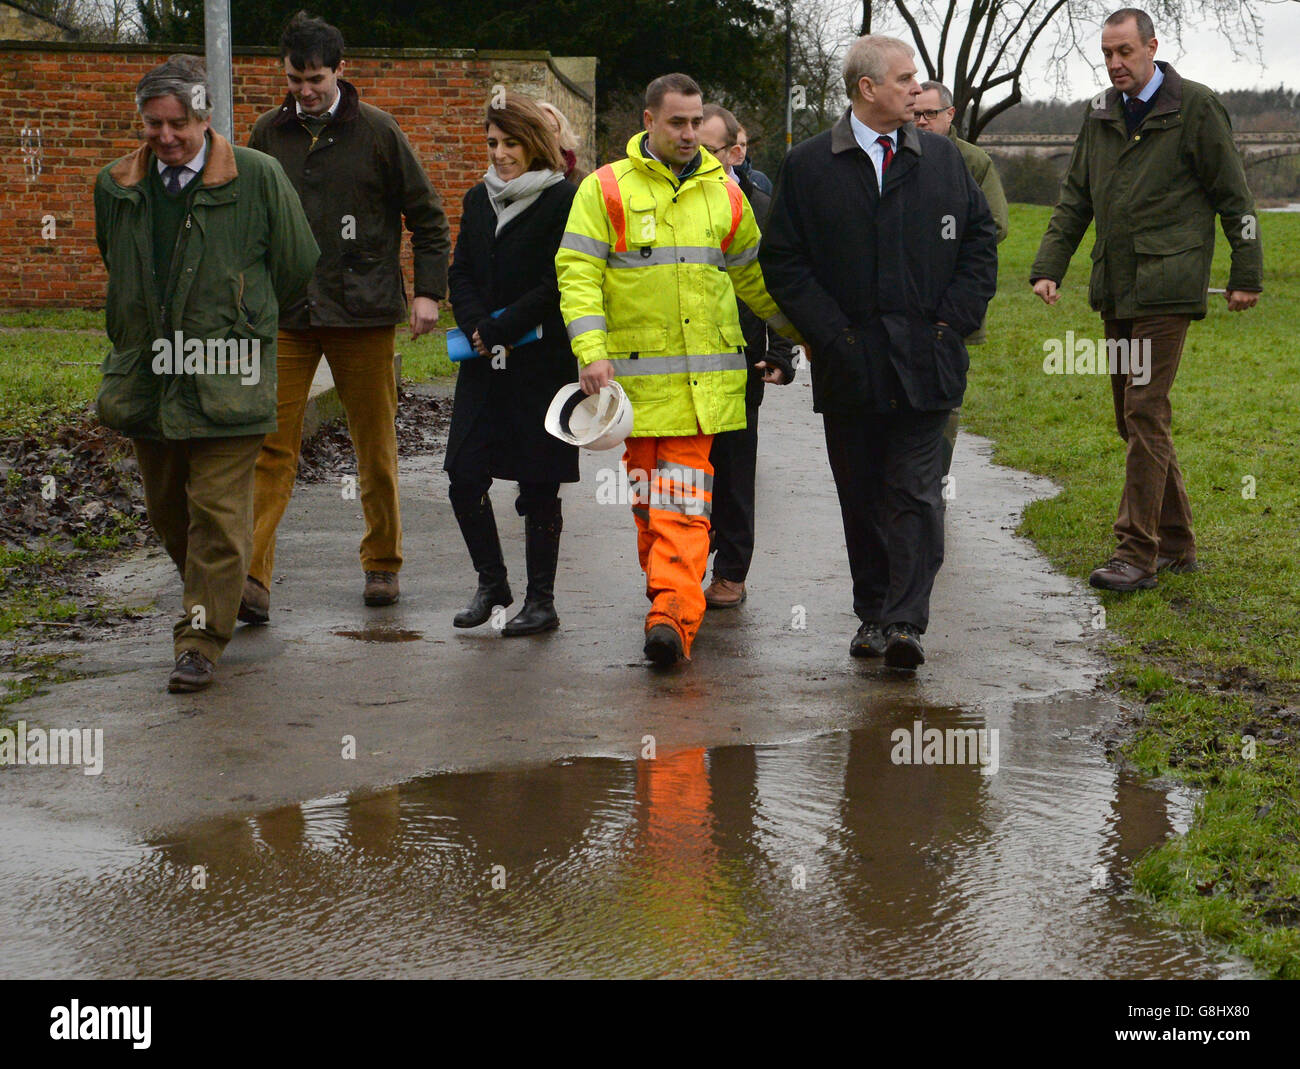 The Duke of York talks to Andrew Wood, Senior Engineer with North Yorkshire County Council, as they walk along the footpath close to the River Wharfe in Tadcaster, during his visit to the area to view flood damage. Stock Photo